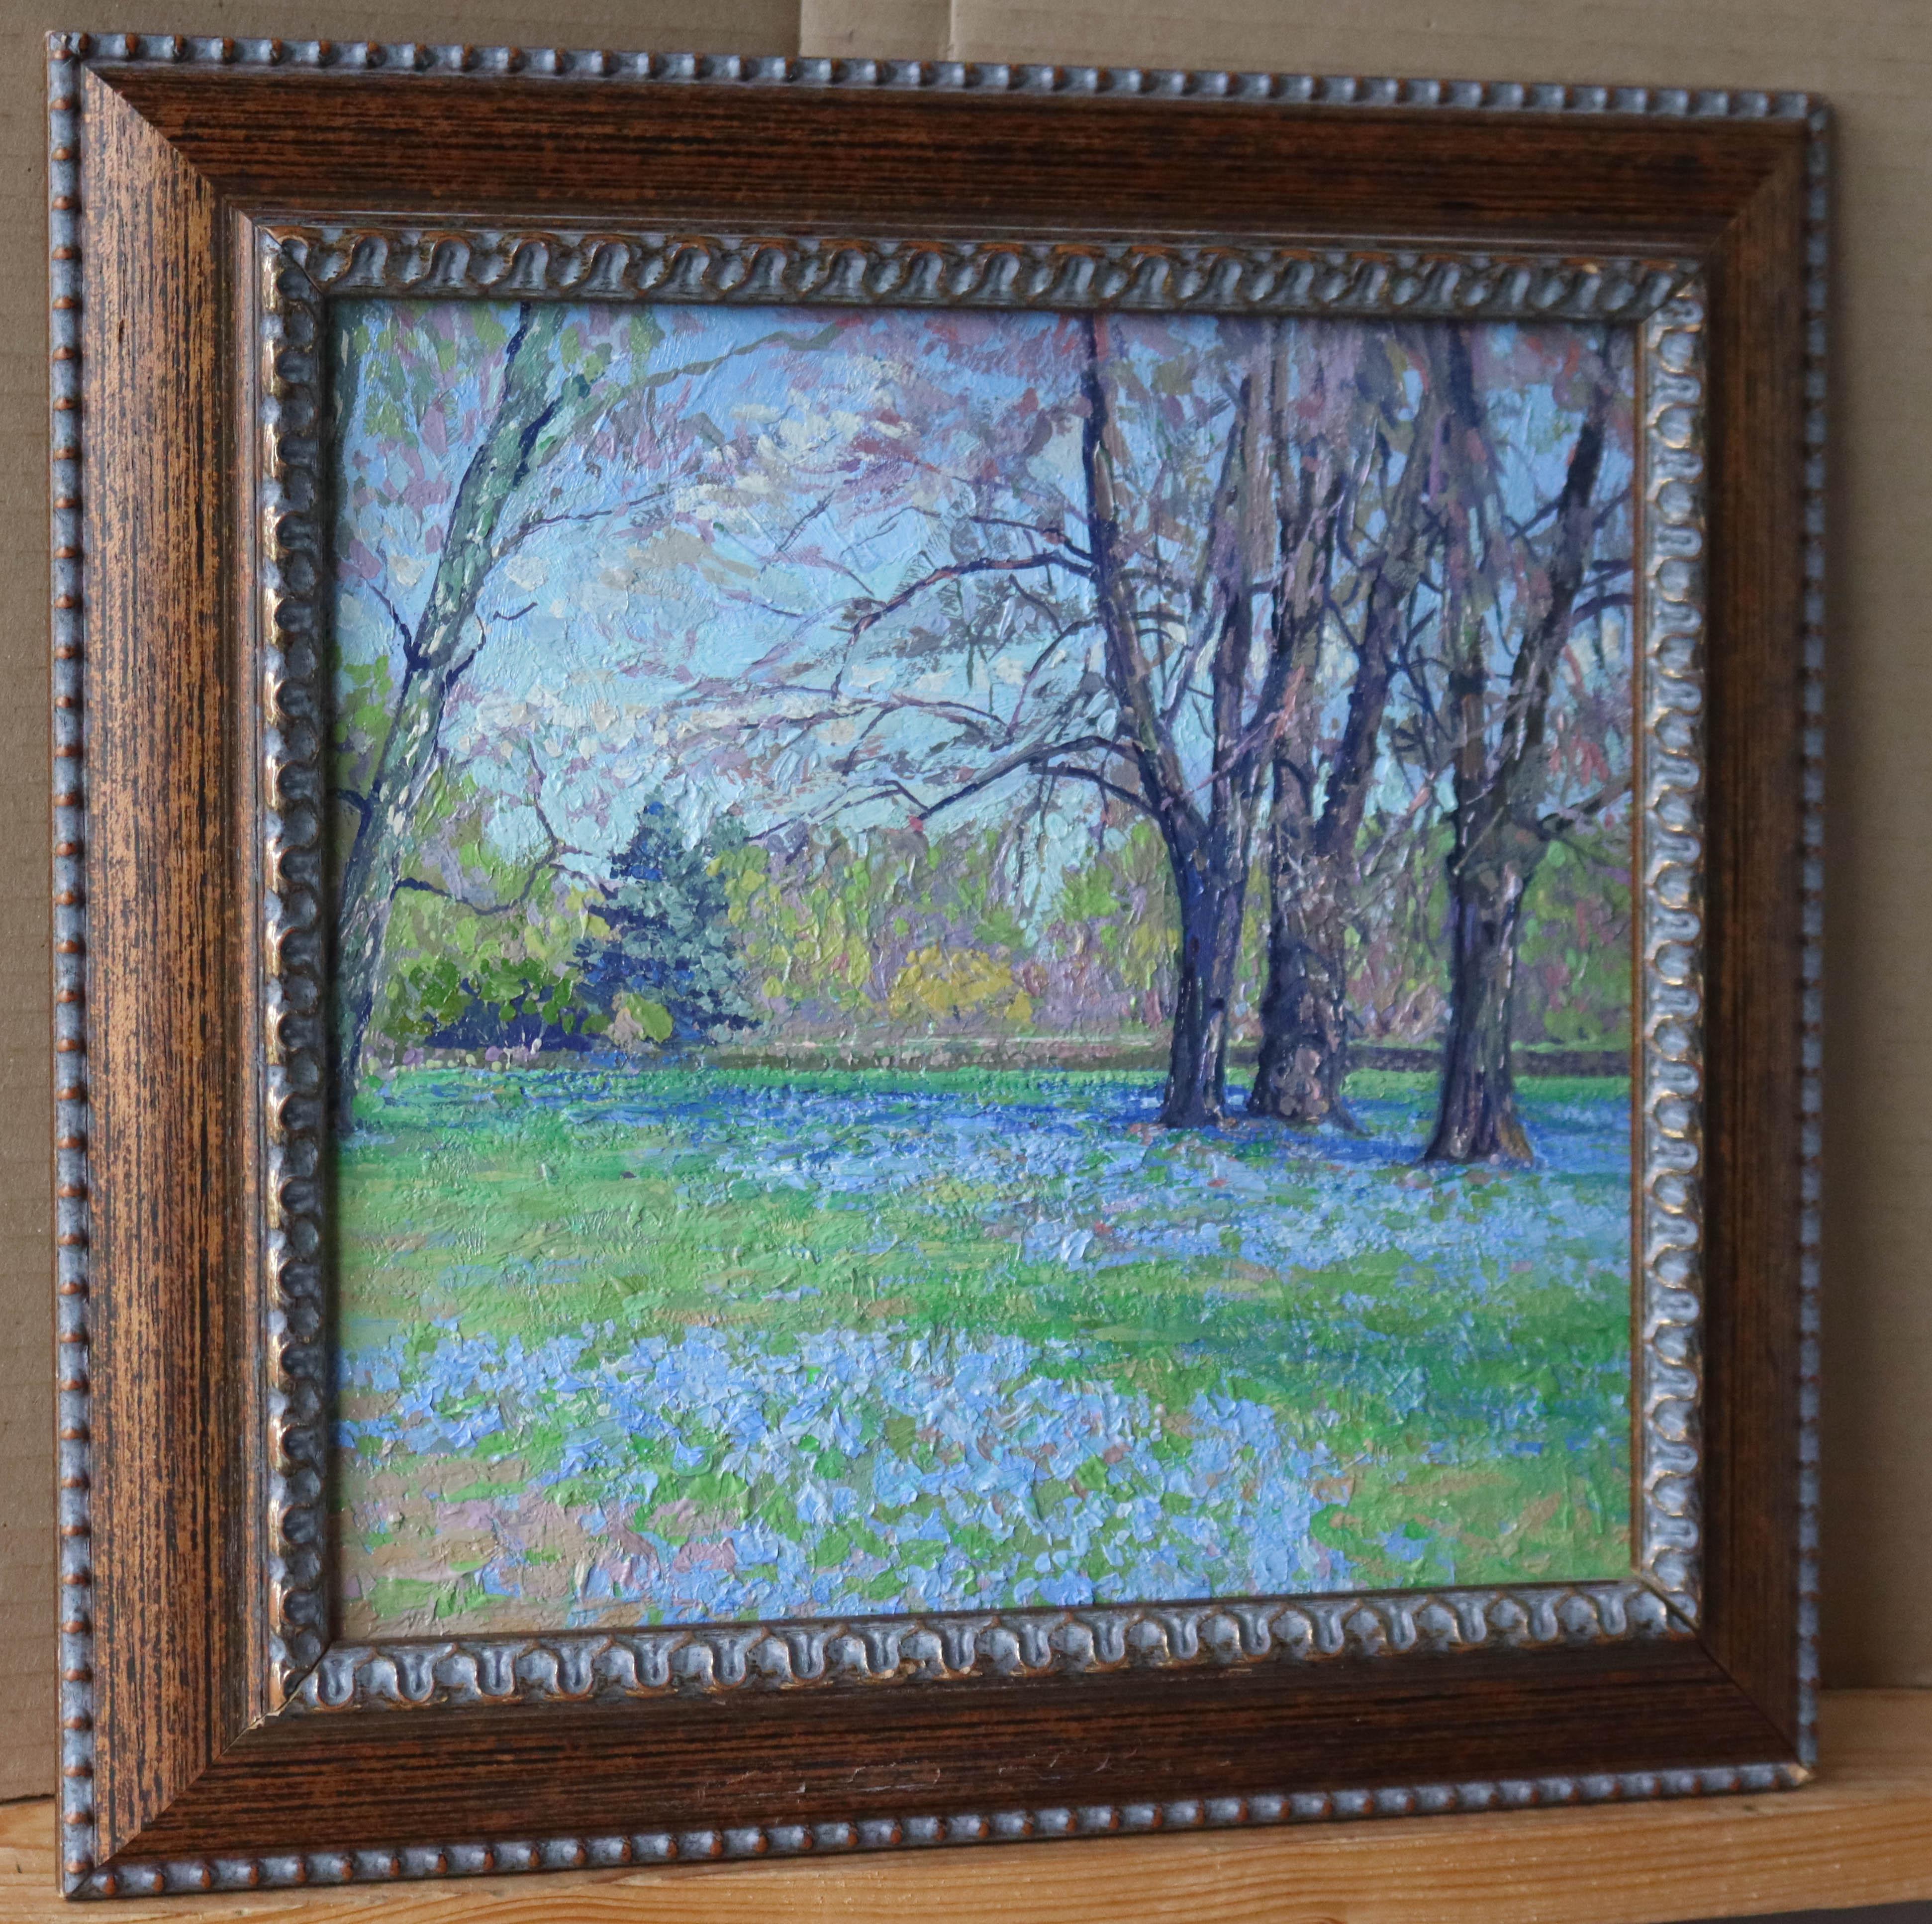 Scilla of Lucilia. Botanical Garden. Oil painting Plein Air Landscape with Trees - Impressionist Painting by Simon Kozhin